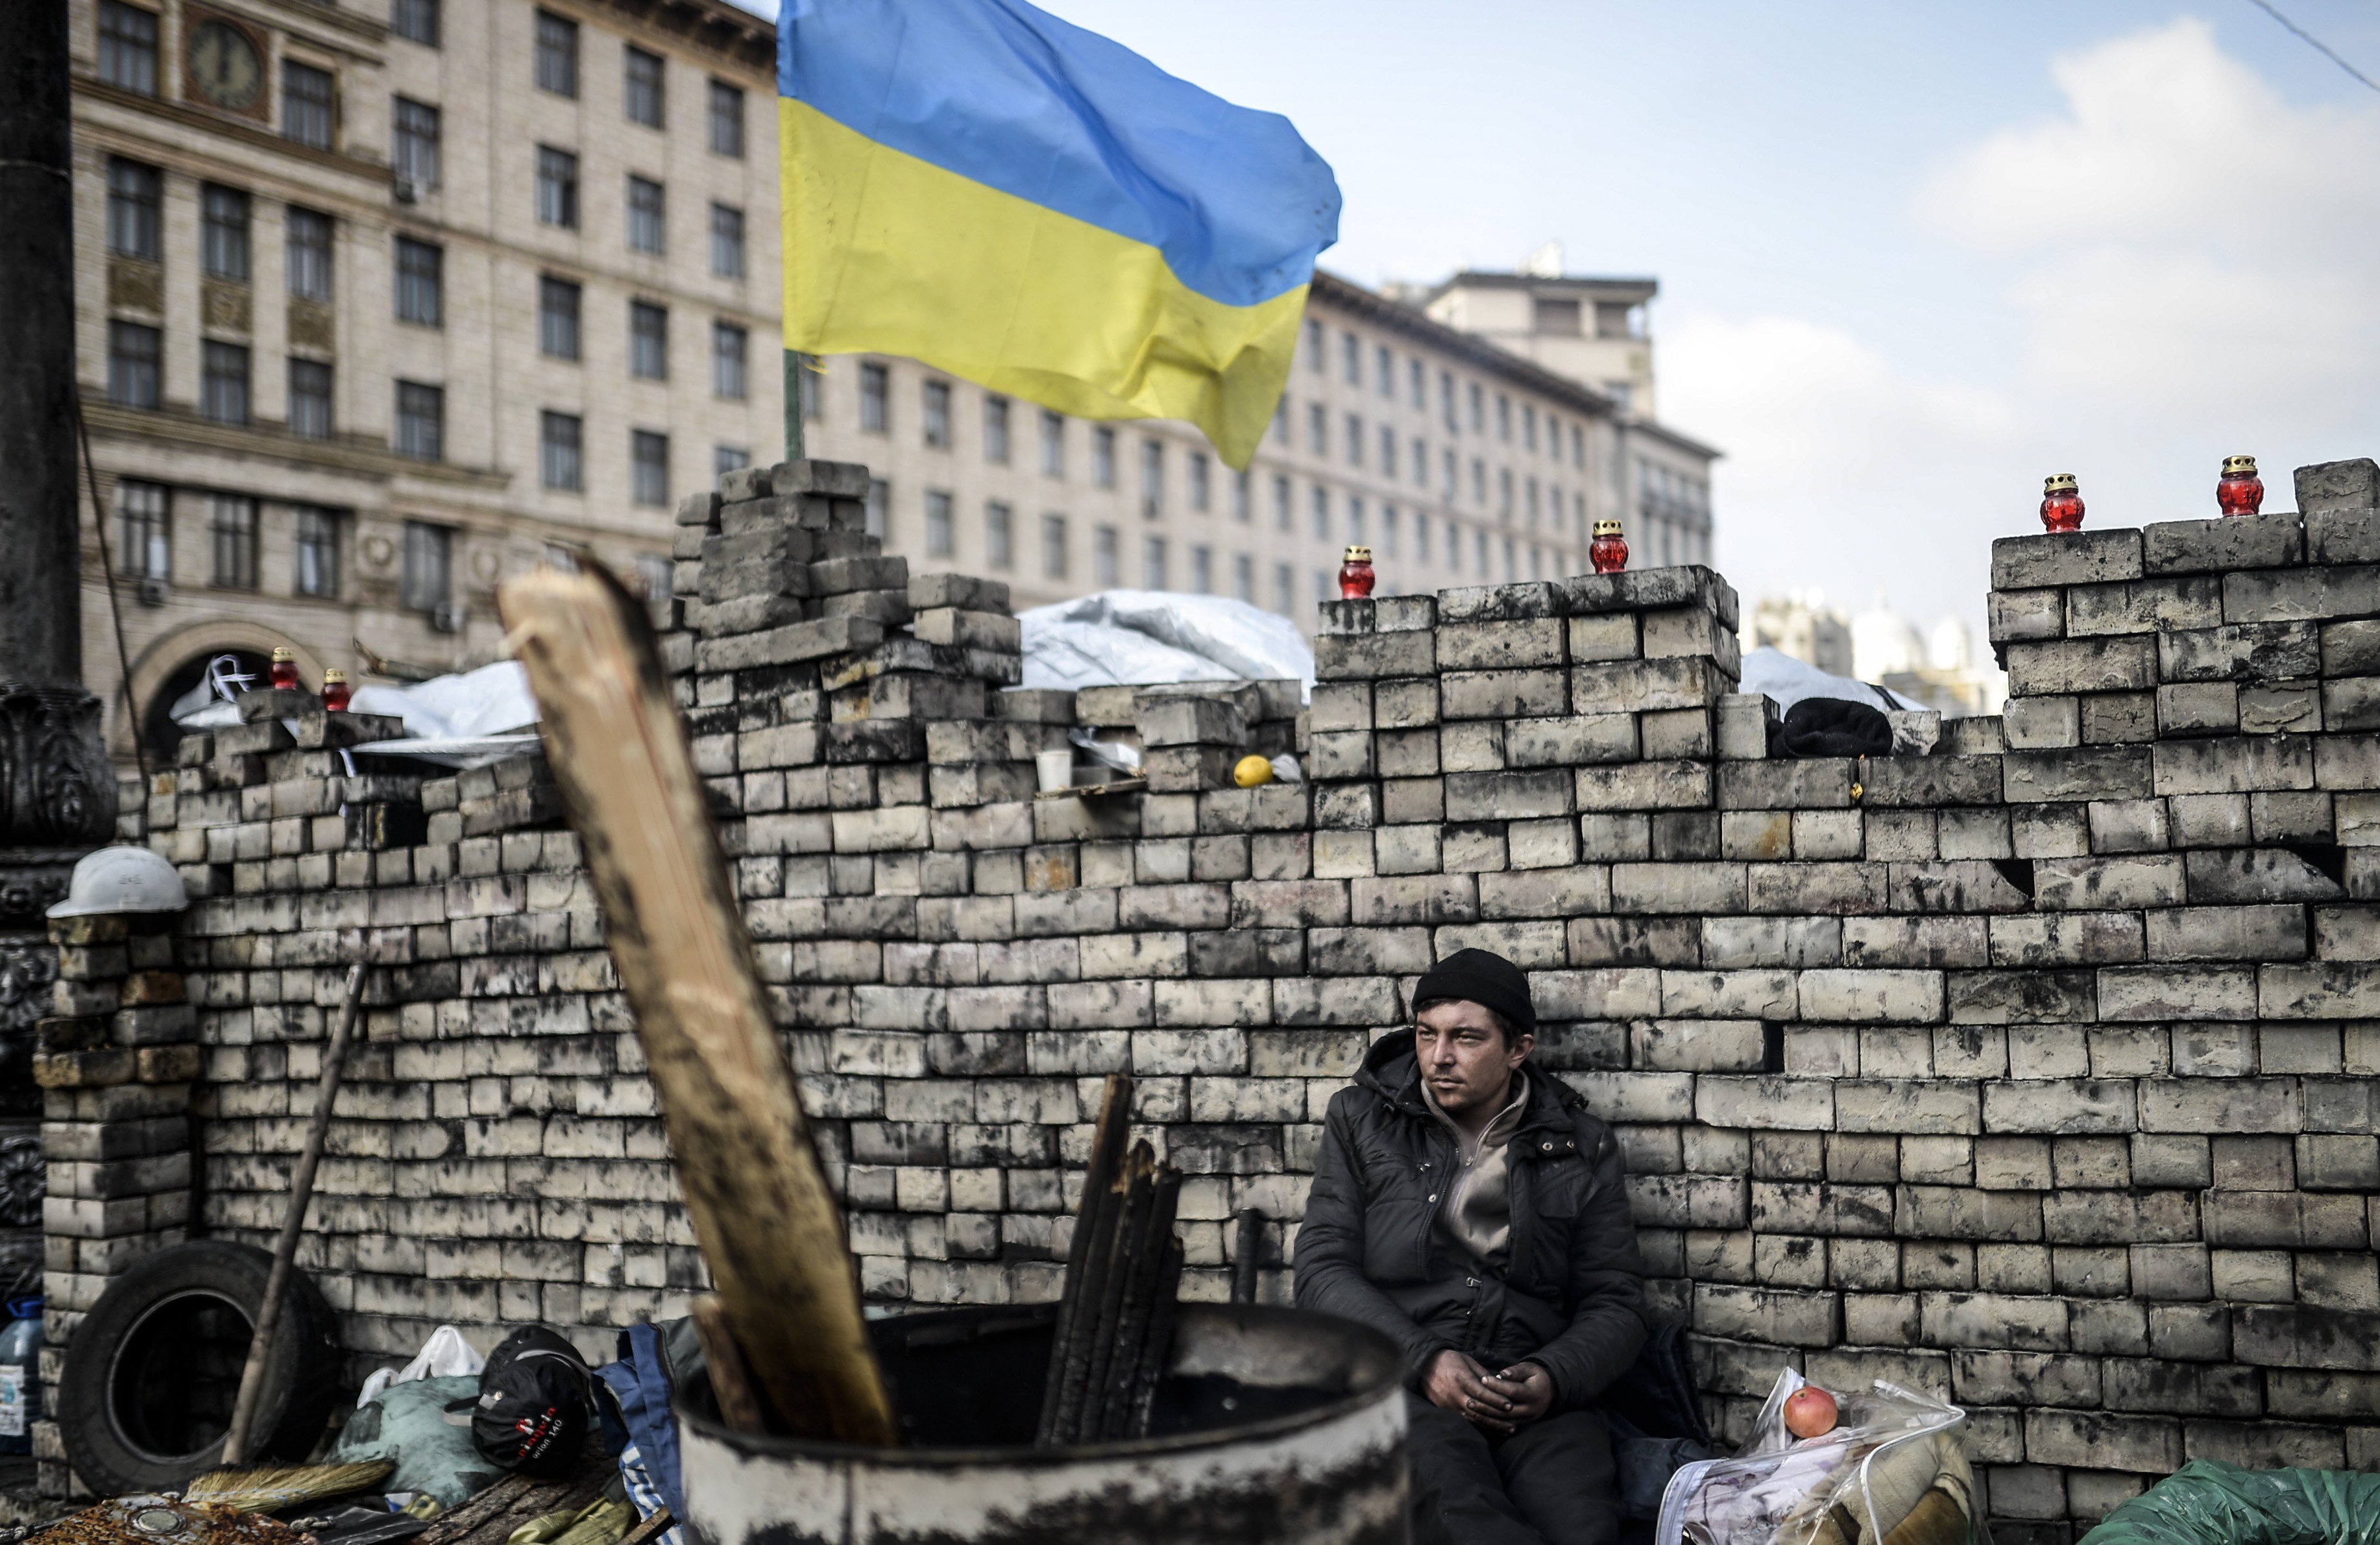 An antigovernment protester sits behind a barricade on Kiev's Independence Square on Feb. 24, 2014 (Bulent Kilic—AFP/Getty Images)